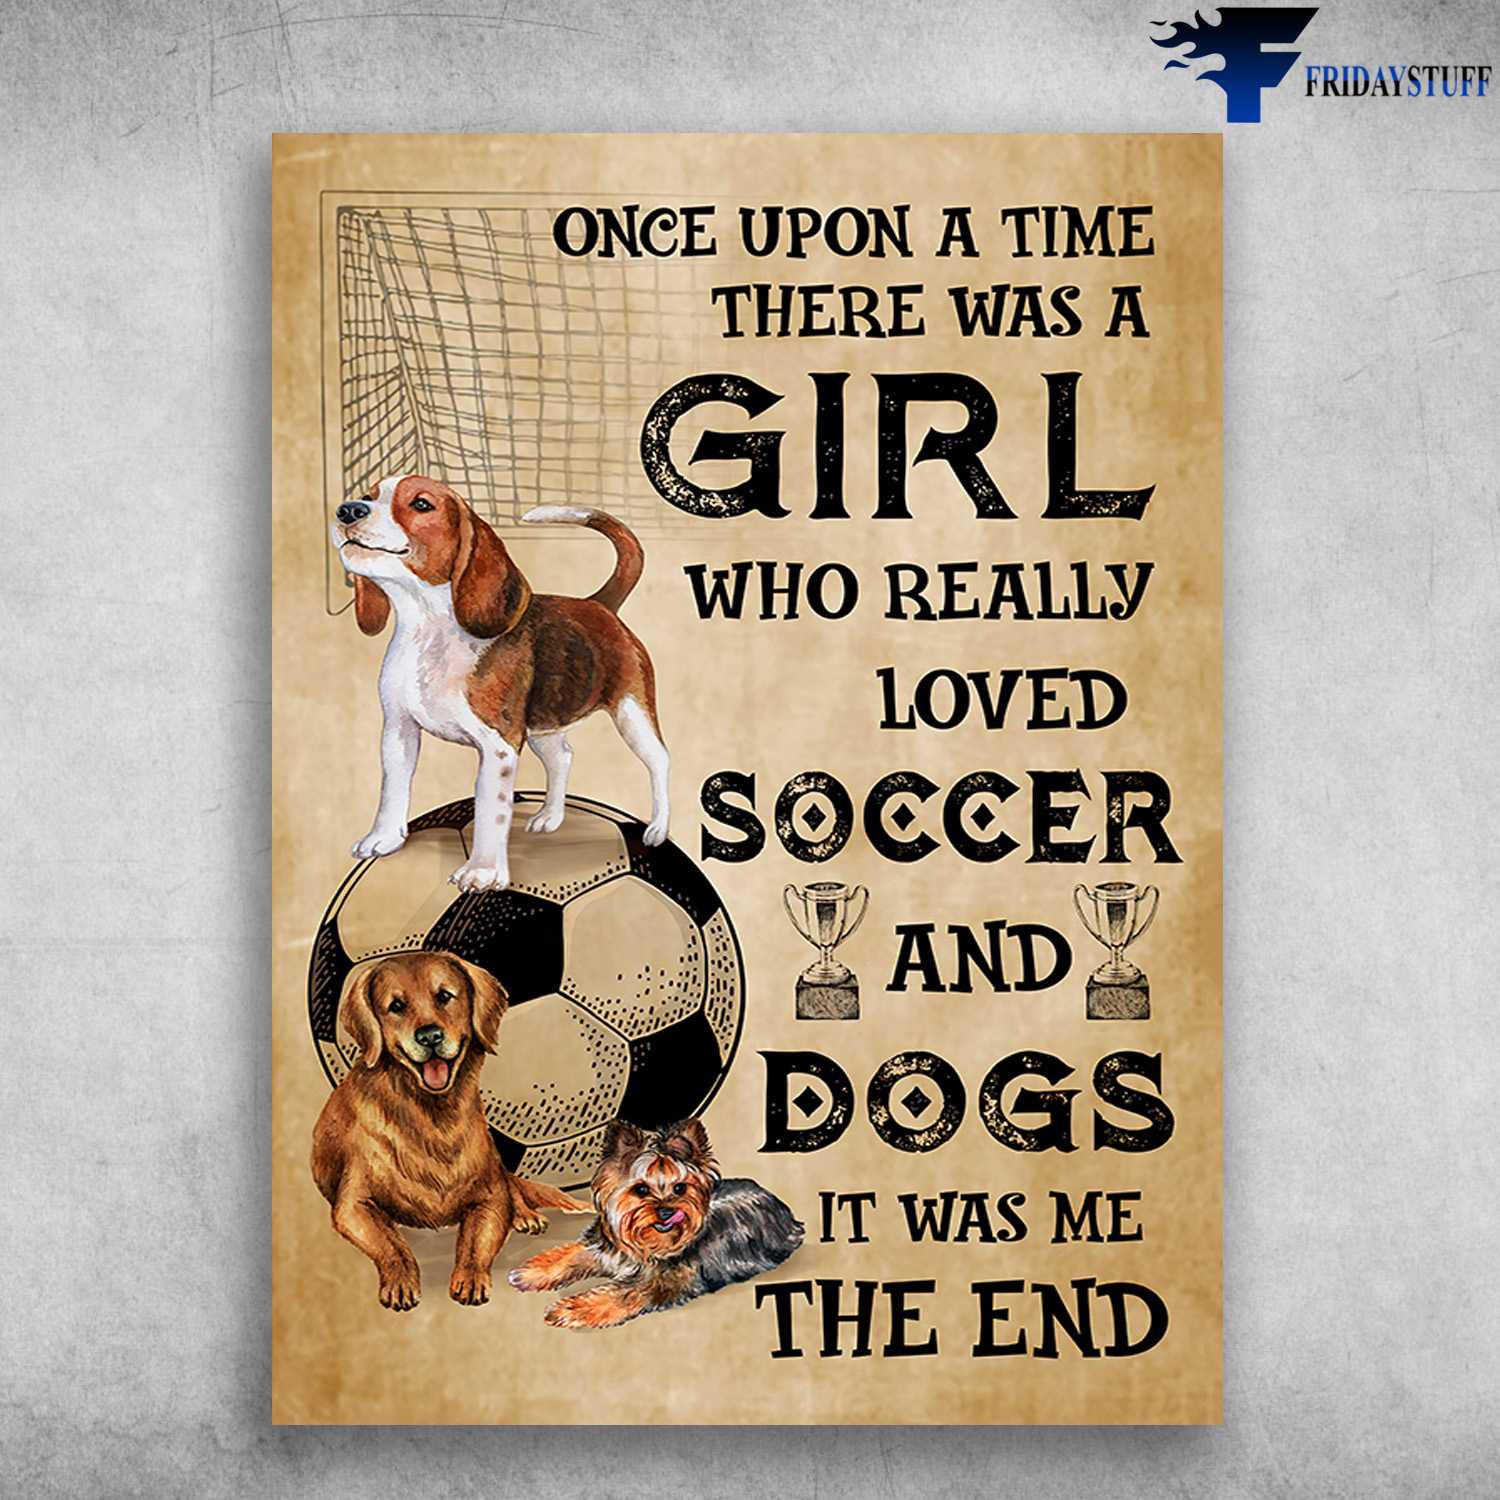 Dog Lover, Soccer Poster, Once Upon A Time, There Was A Girl, Who Really Loved Soccer And Dog, It Was Me, The End